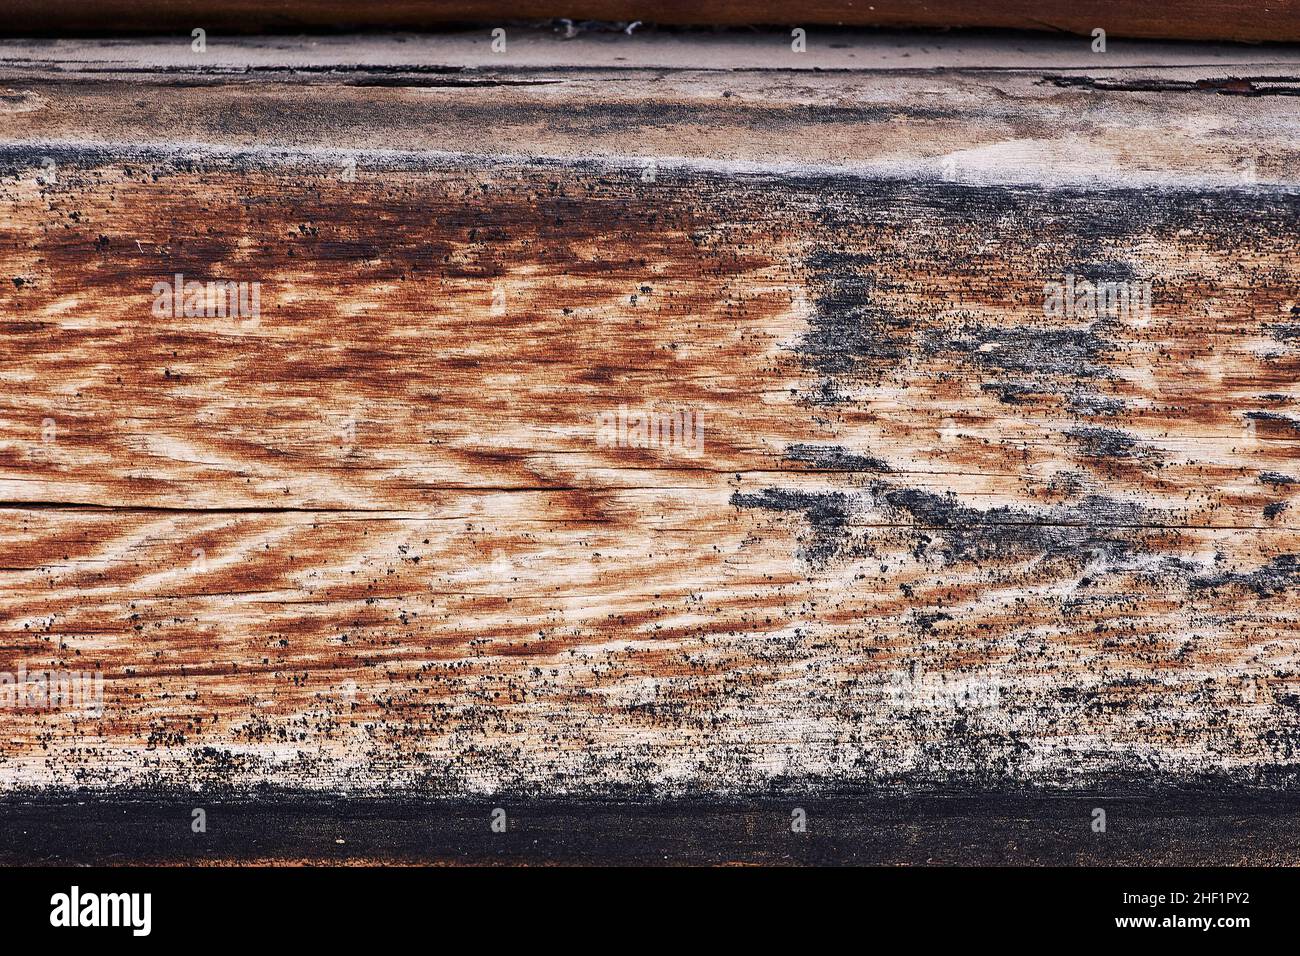 Part of a wooden board close-up with a well-read texture. Stock Photo